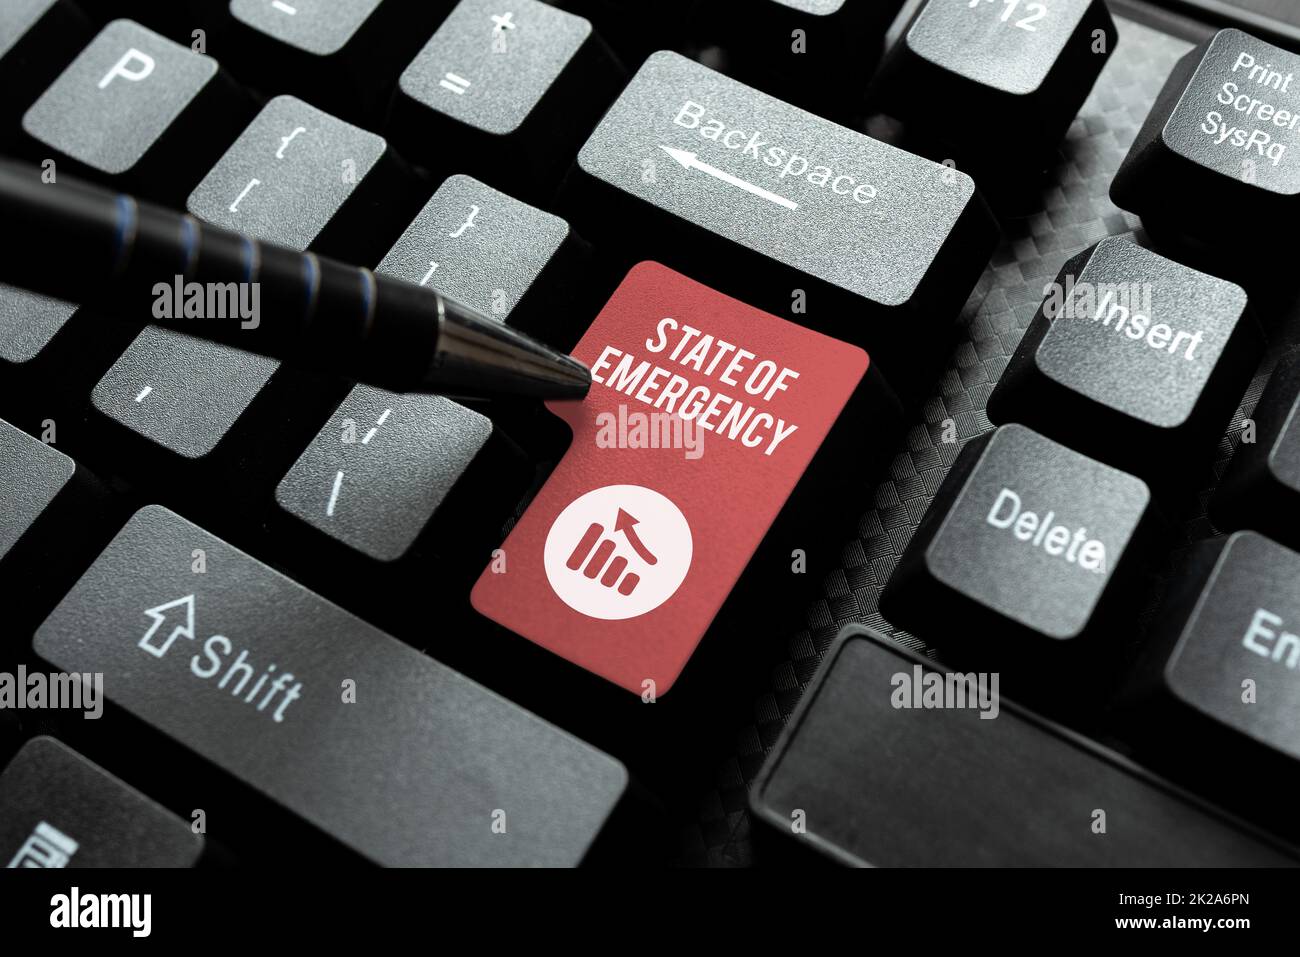 Writing displaying text State Of Emergency. Word for acknowledging an extreme condition affecting at a national level Entering Image Keyword And Description, Typing Word Definition And Meaning Stock Photo